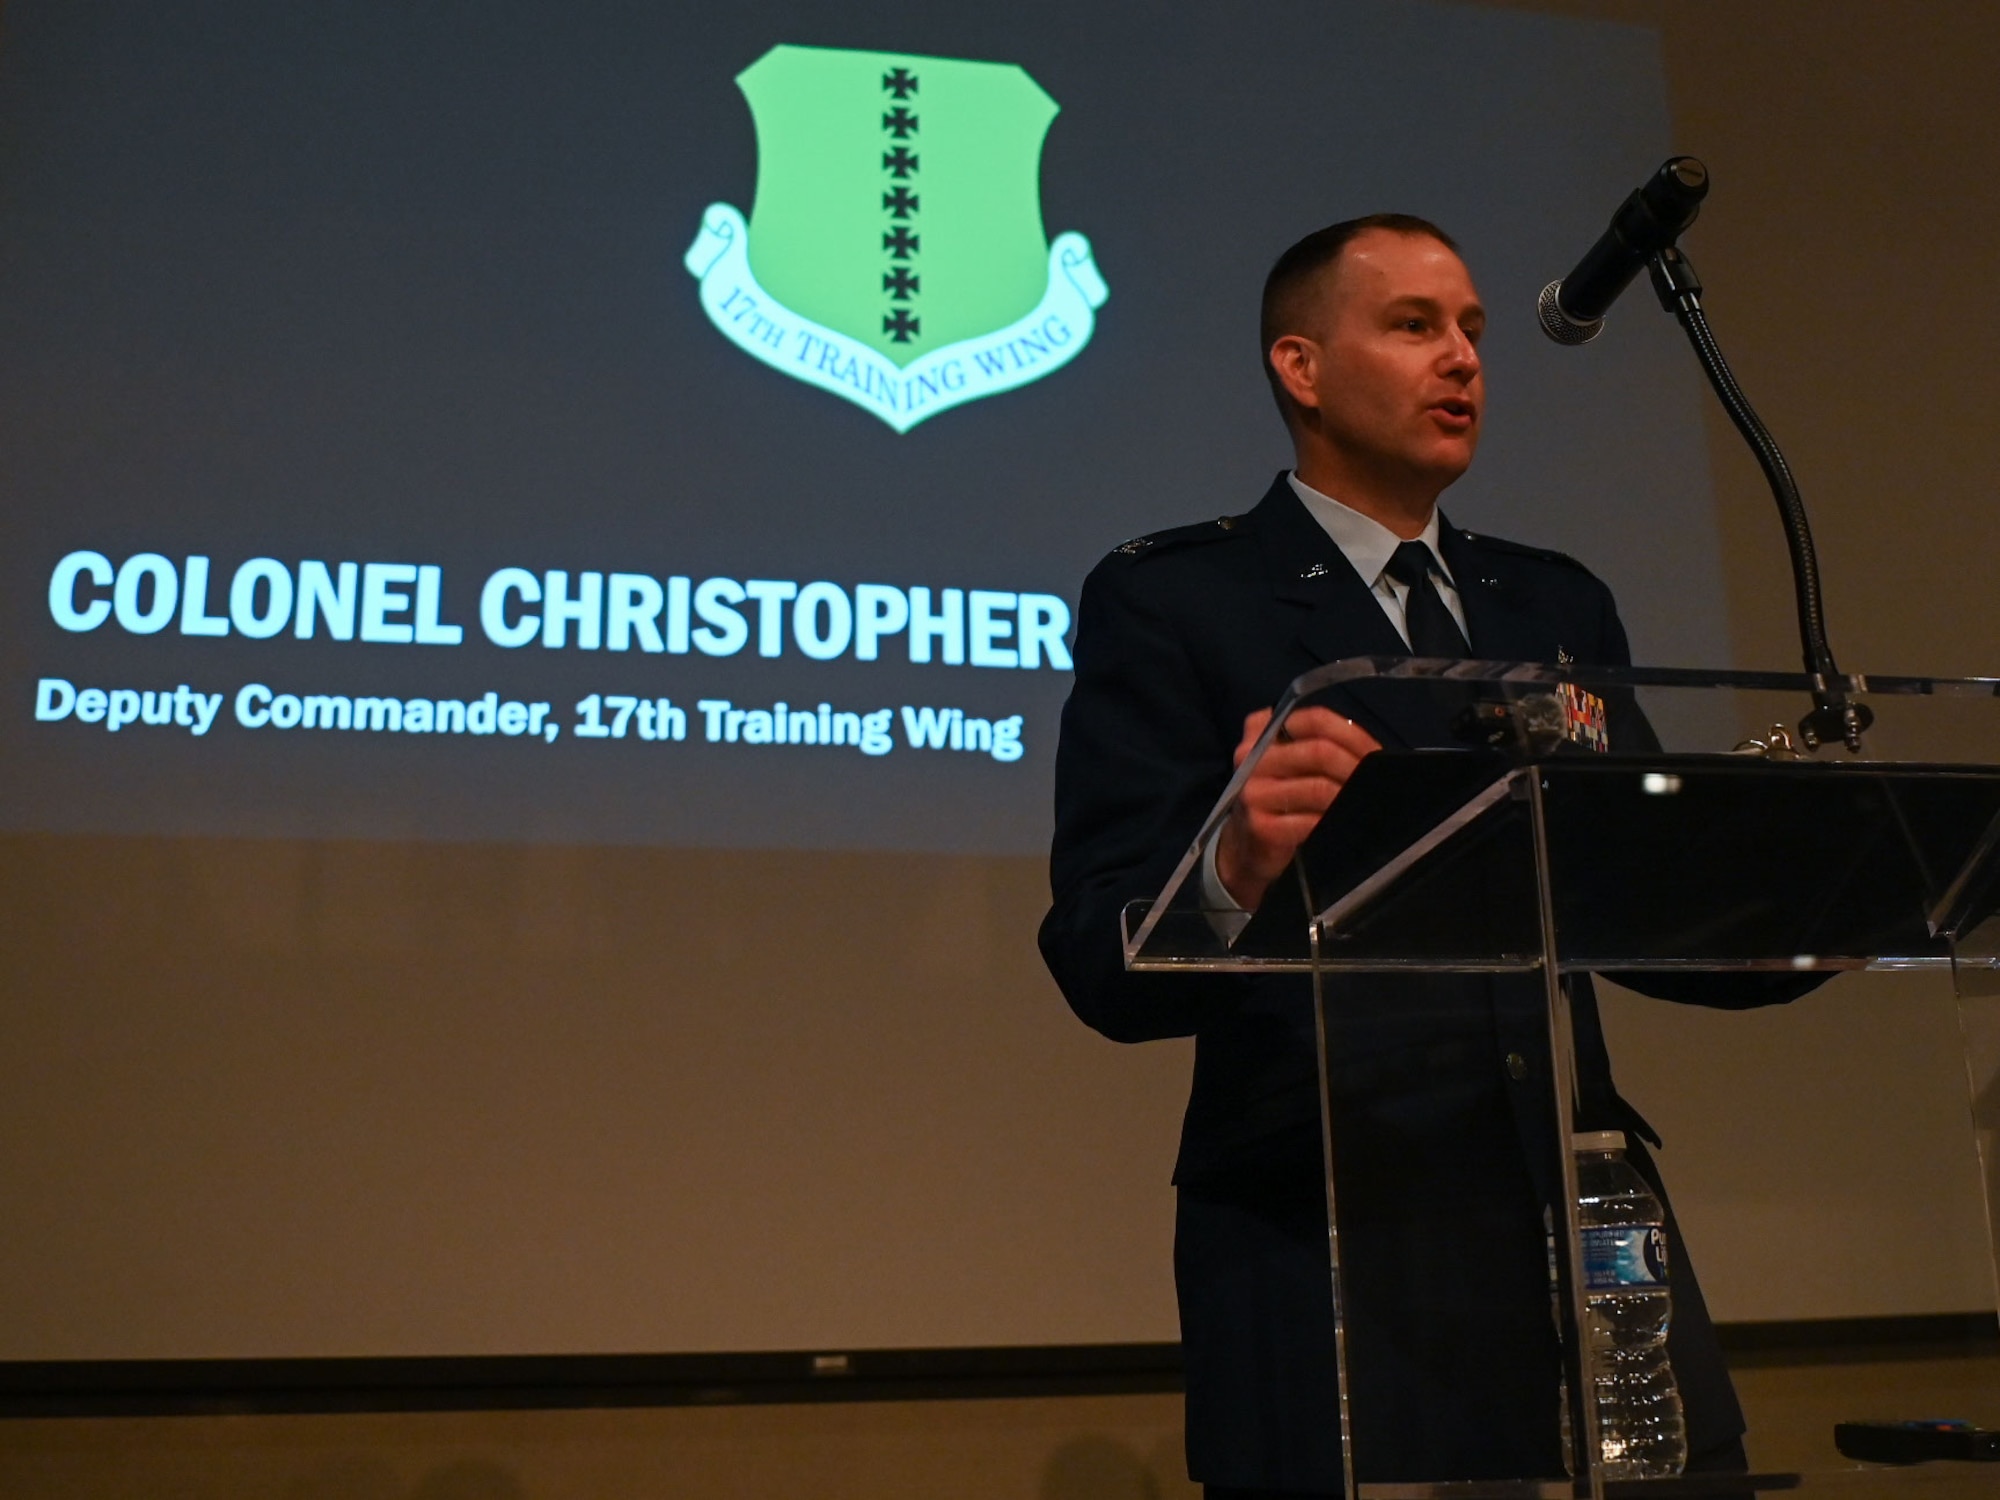 U.S. Air Force Col. Christopher Corbett, 17th Training Wing deputy commander, speaks at the San Angelo Chamber of Commerce State of Goodfellow luncheon at the McNease Convention Center, San Angelo, Texas, Mar. 19, 2024. Corbett’s visit presented an opportunity to inform civic leaders about the state of Goodfellow and highlight the good relationship with the San Angelo community. (U.S. Air Force photo by Airman 1st Class Evelyn J. D’Errico)